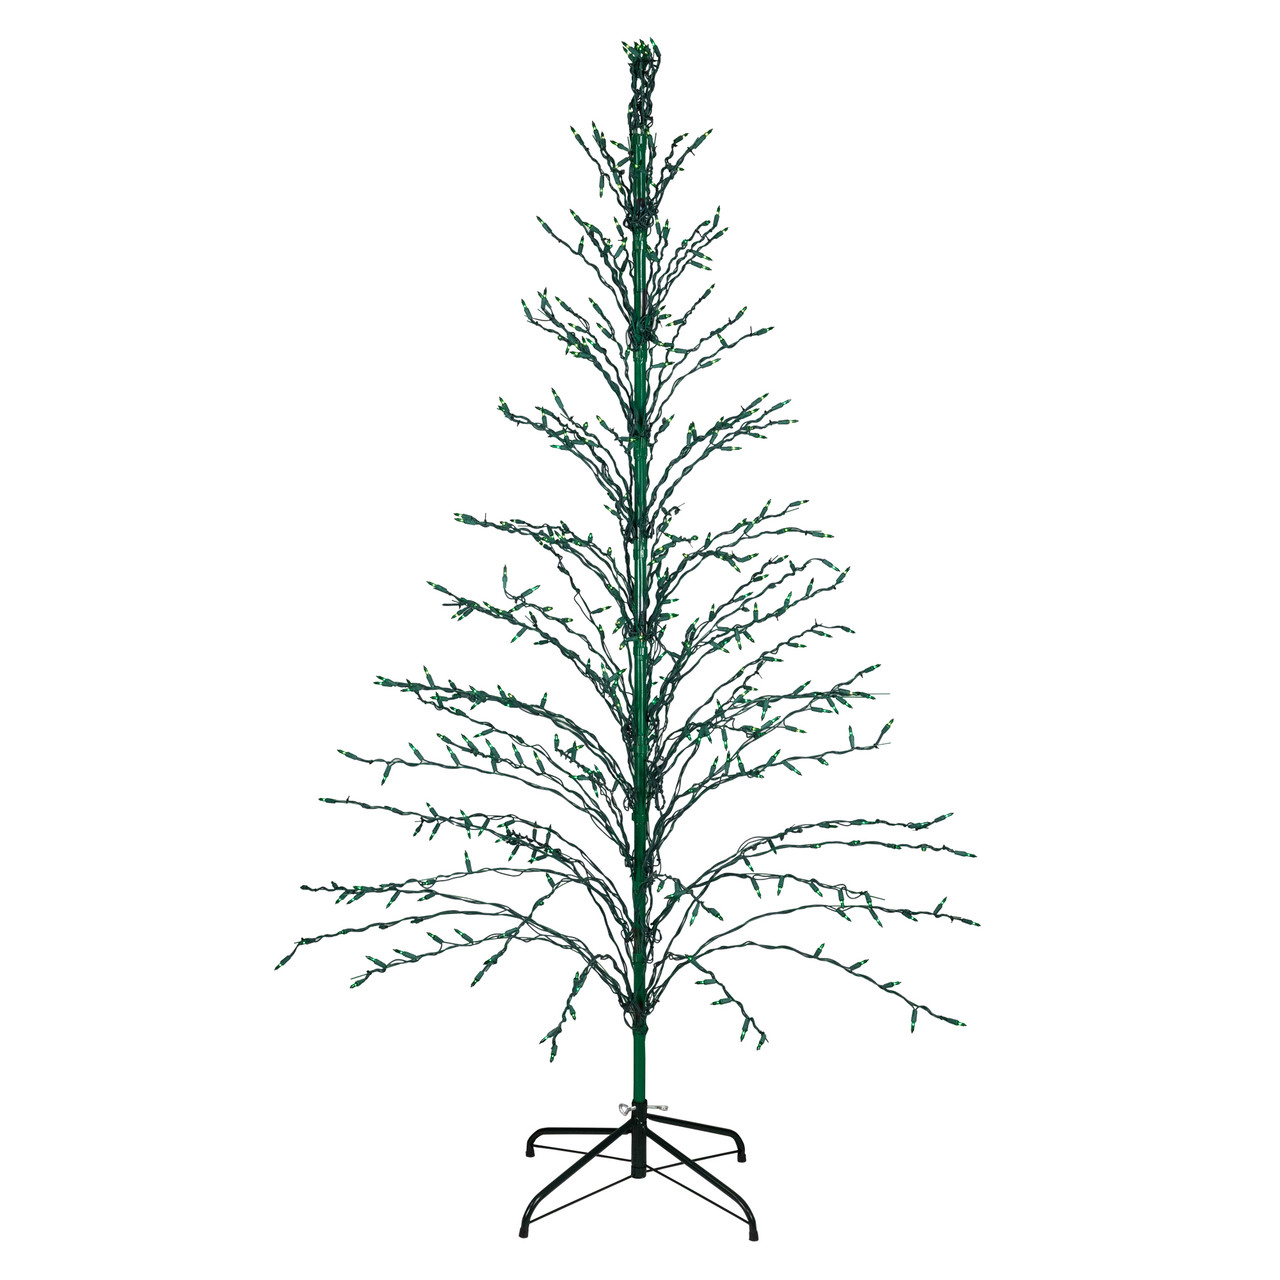 Northlight 6' Lighted Christmas White Birch Twig Tree Outdoor Decoration -  Warm White LED Lights